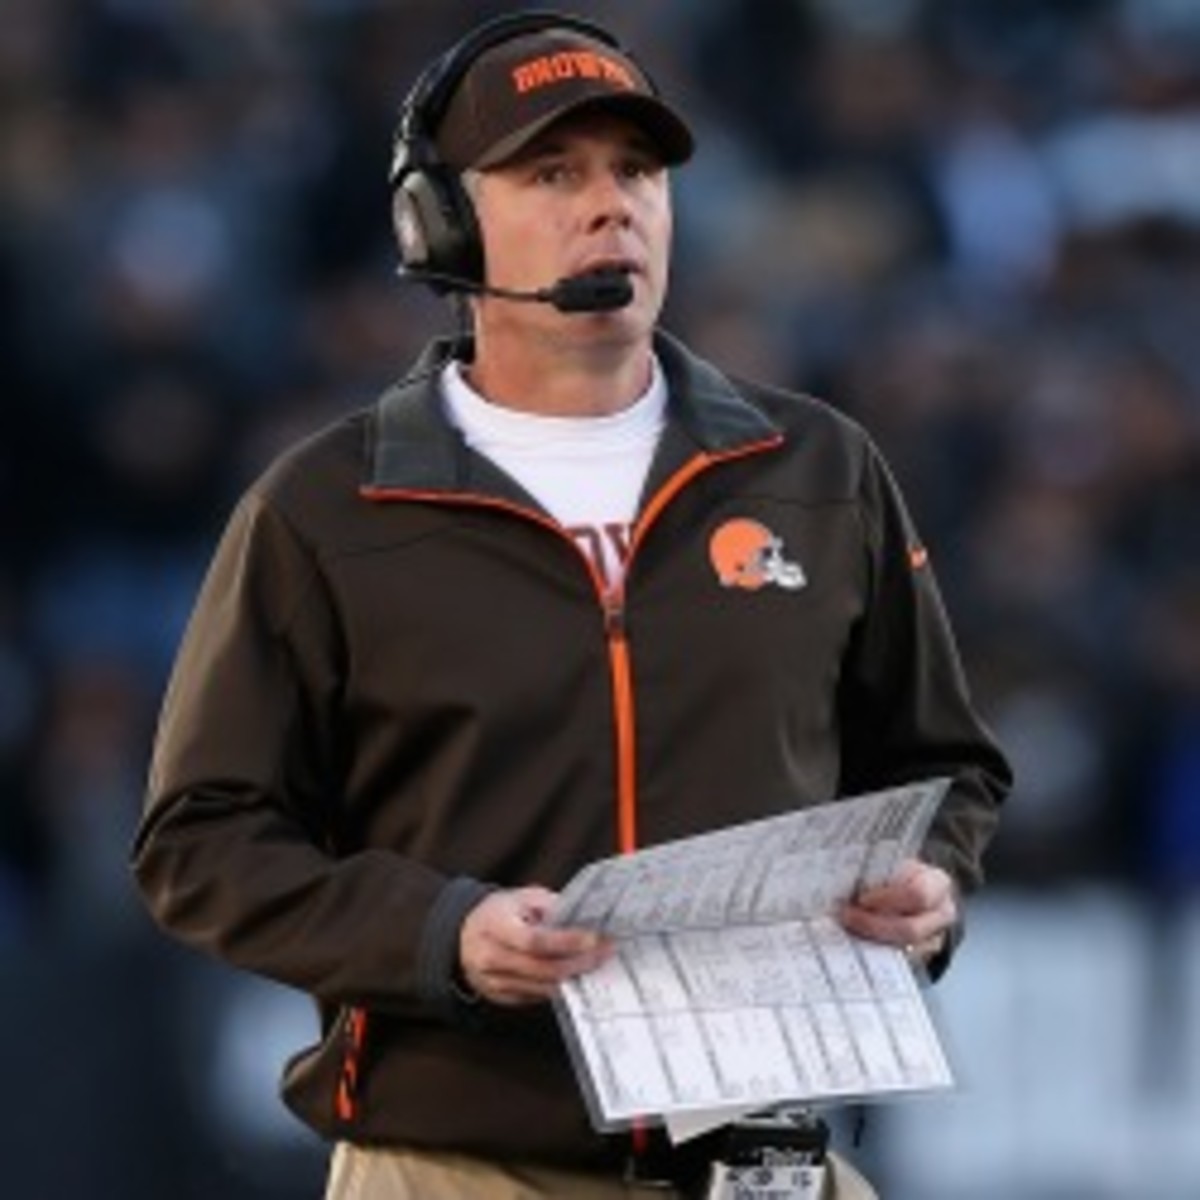 Browns head coach Pat Shurmur will reportedly not return to the team next season. (Ezra Shaw/Getty Images)